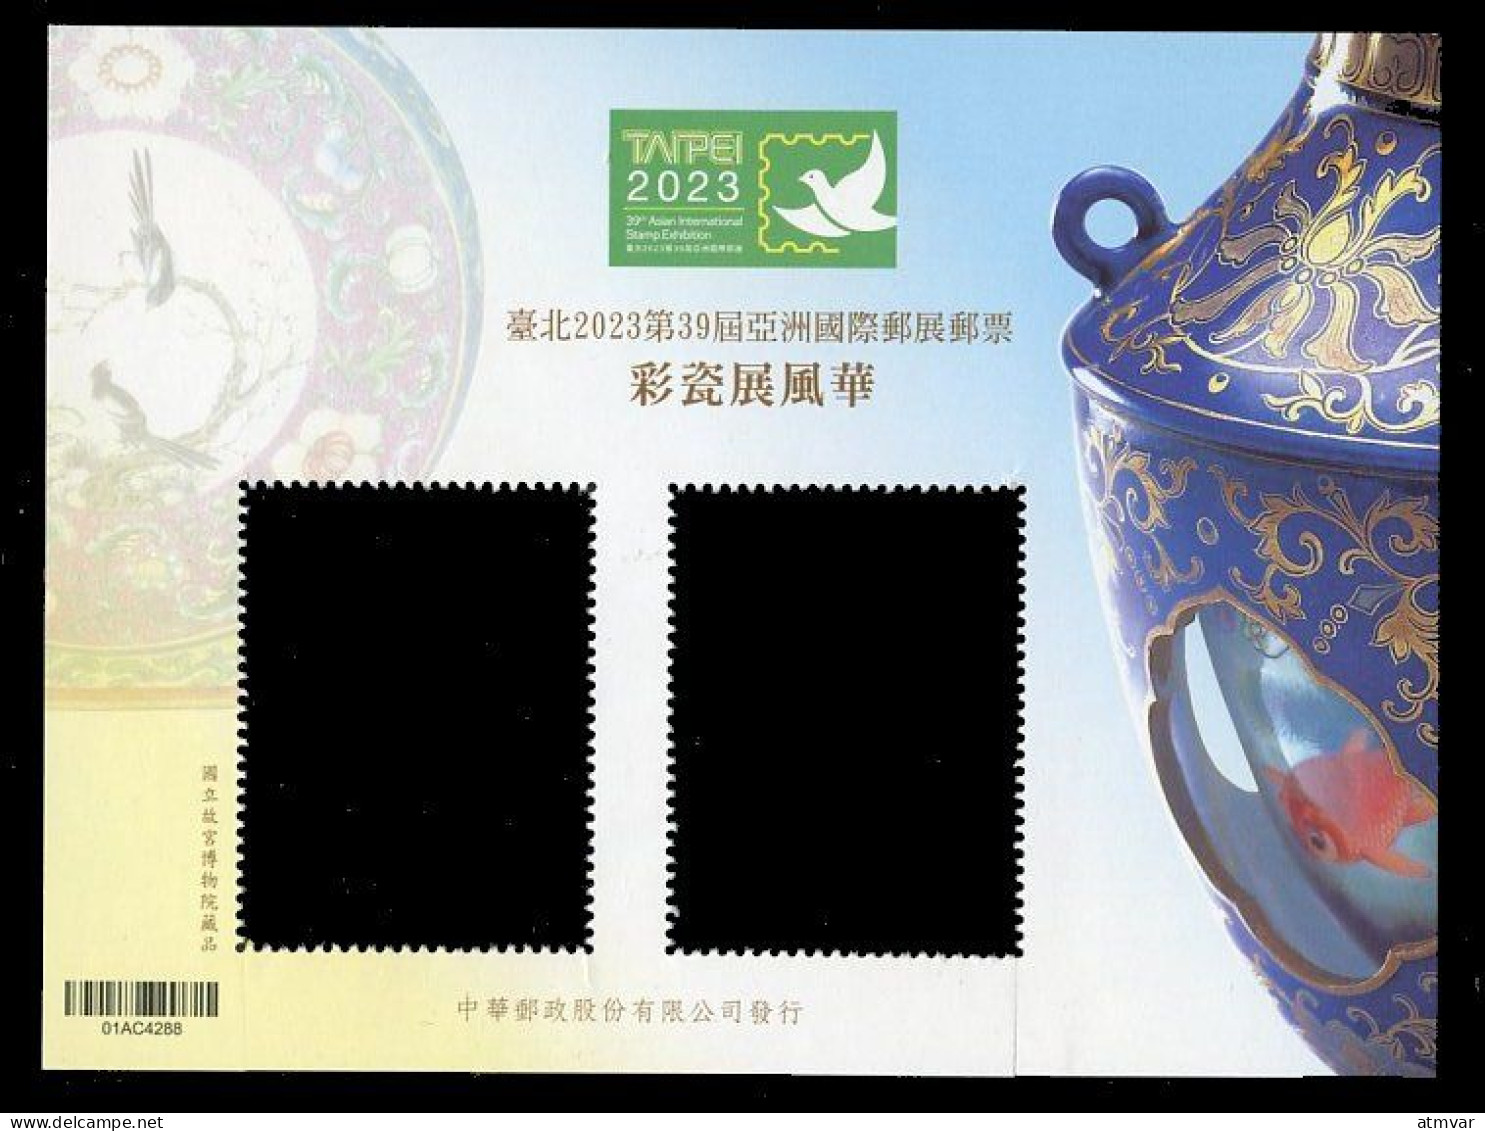 TAIWAN (2023) Cartes Maximum Cards - Taipei 2023 39th Asian Stamp Exhibition, Artistic Vases, Porcelain, Qing Dynasty - Porselein